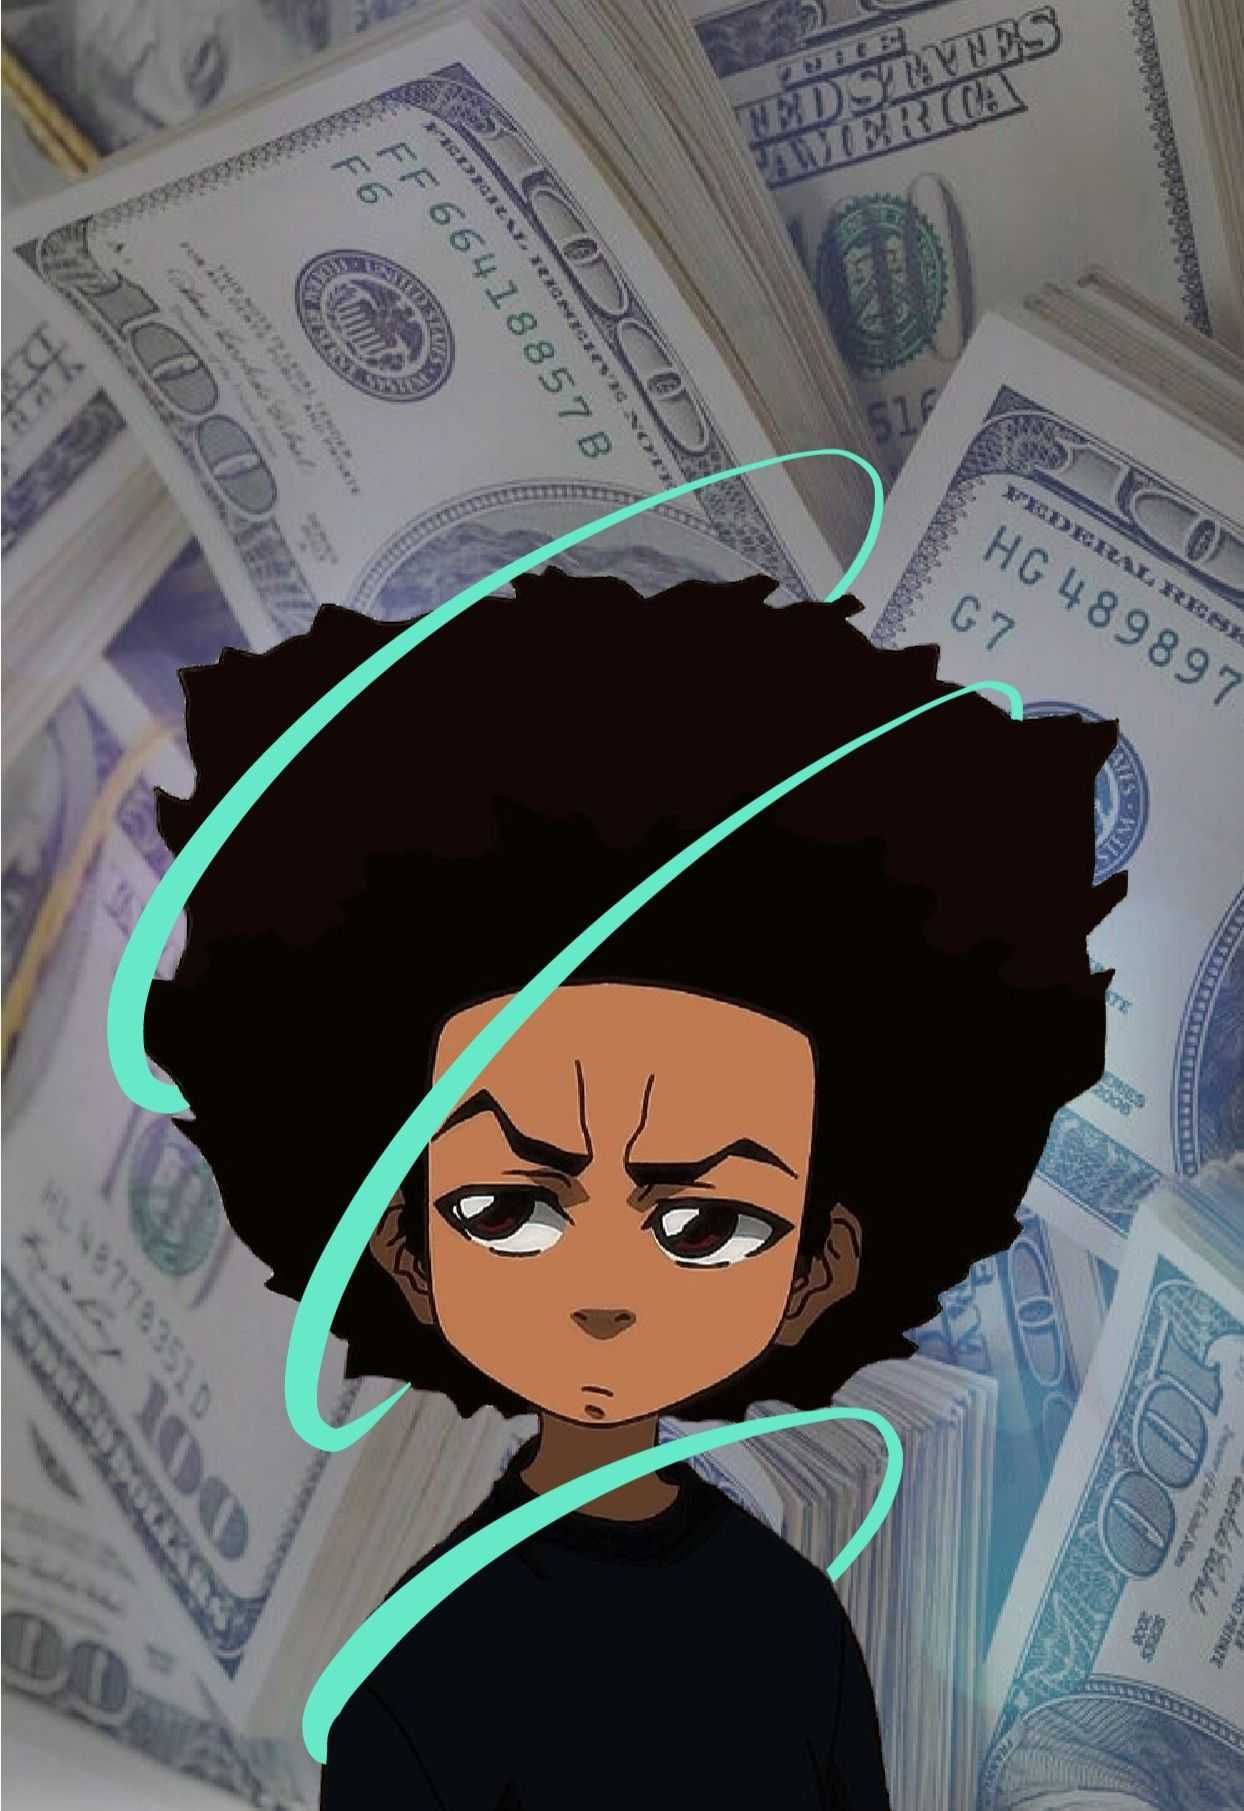 Kolpaper Wallpaper  Boondocks Wallpaper Download  httpswwwkolpapercom92414boondockswallpaper3 Boondocks Wallpaper  for mobile phone tablet desktop computer and other devices HD and 4K  wallpapers Discover more Boondocks Huey Freeman 